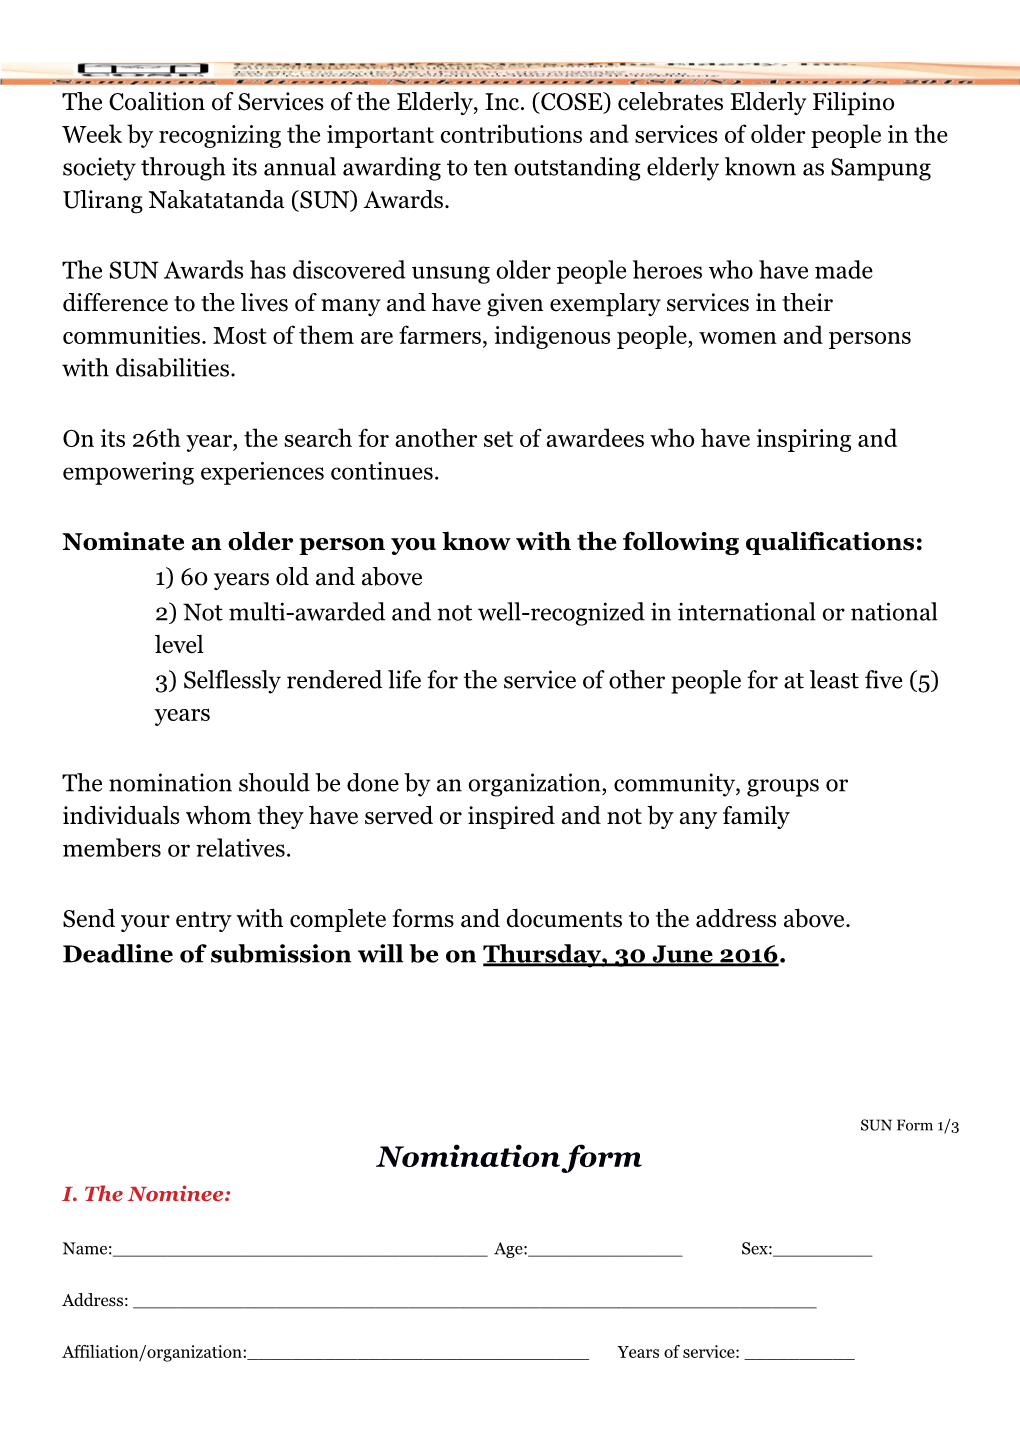 Nominate an Older Person You Know with the Following Qualifications